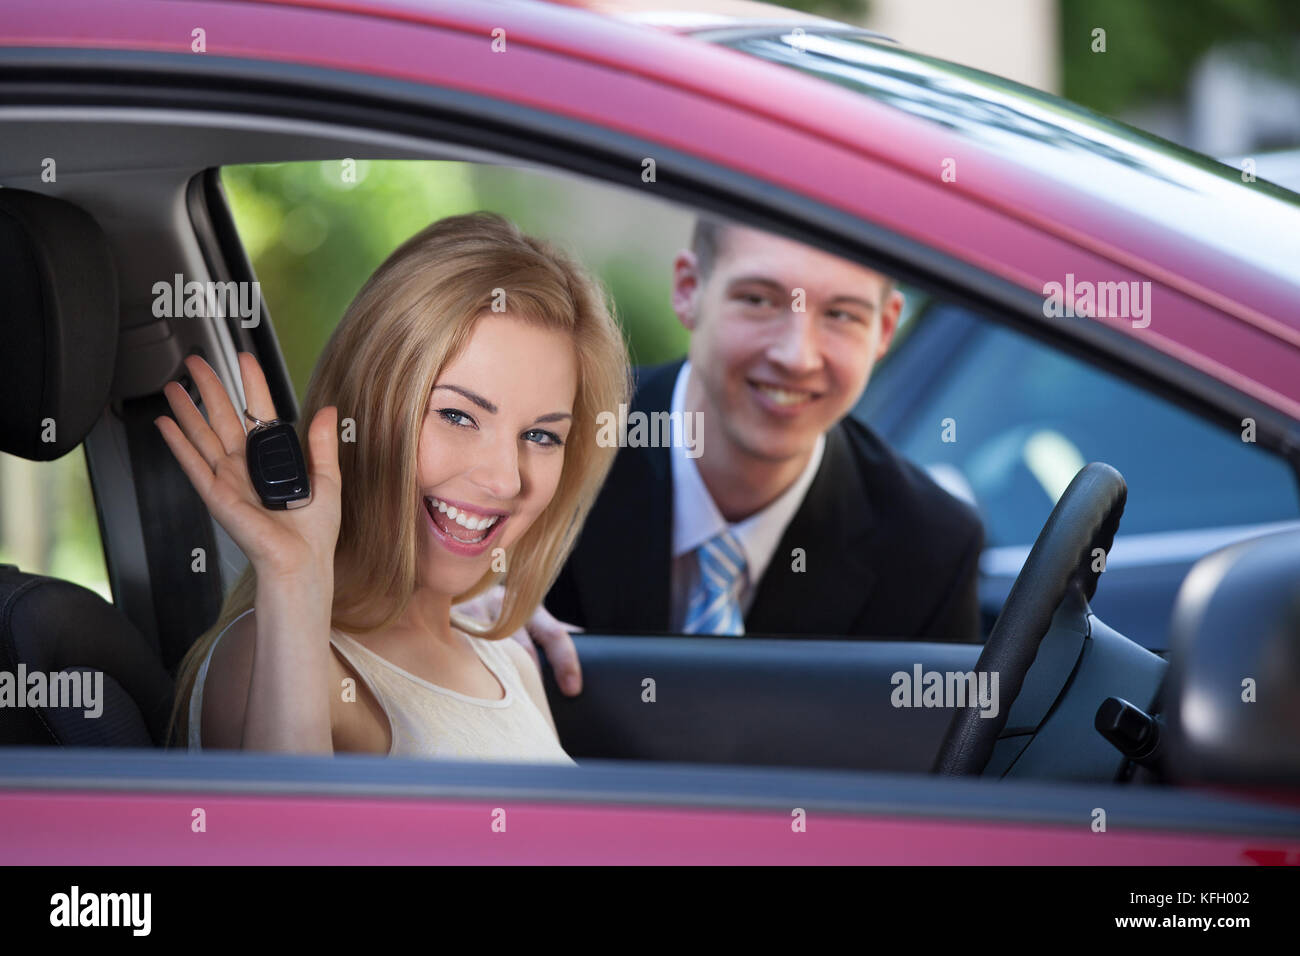 Portrait of happy woman showing key in car with salesman in background Stock Photo